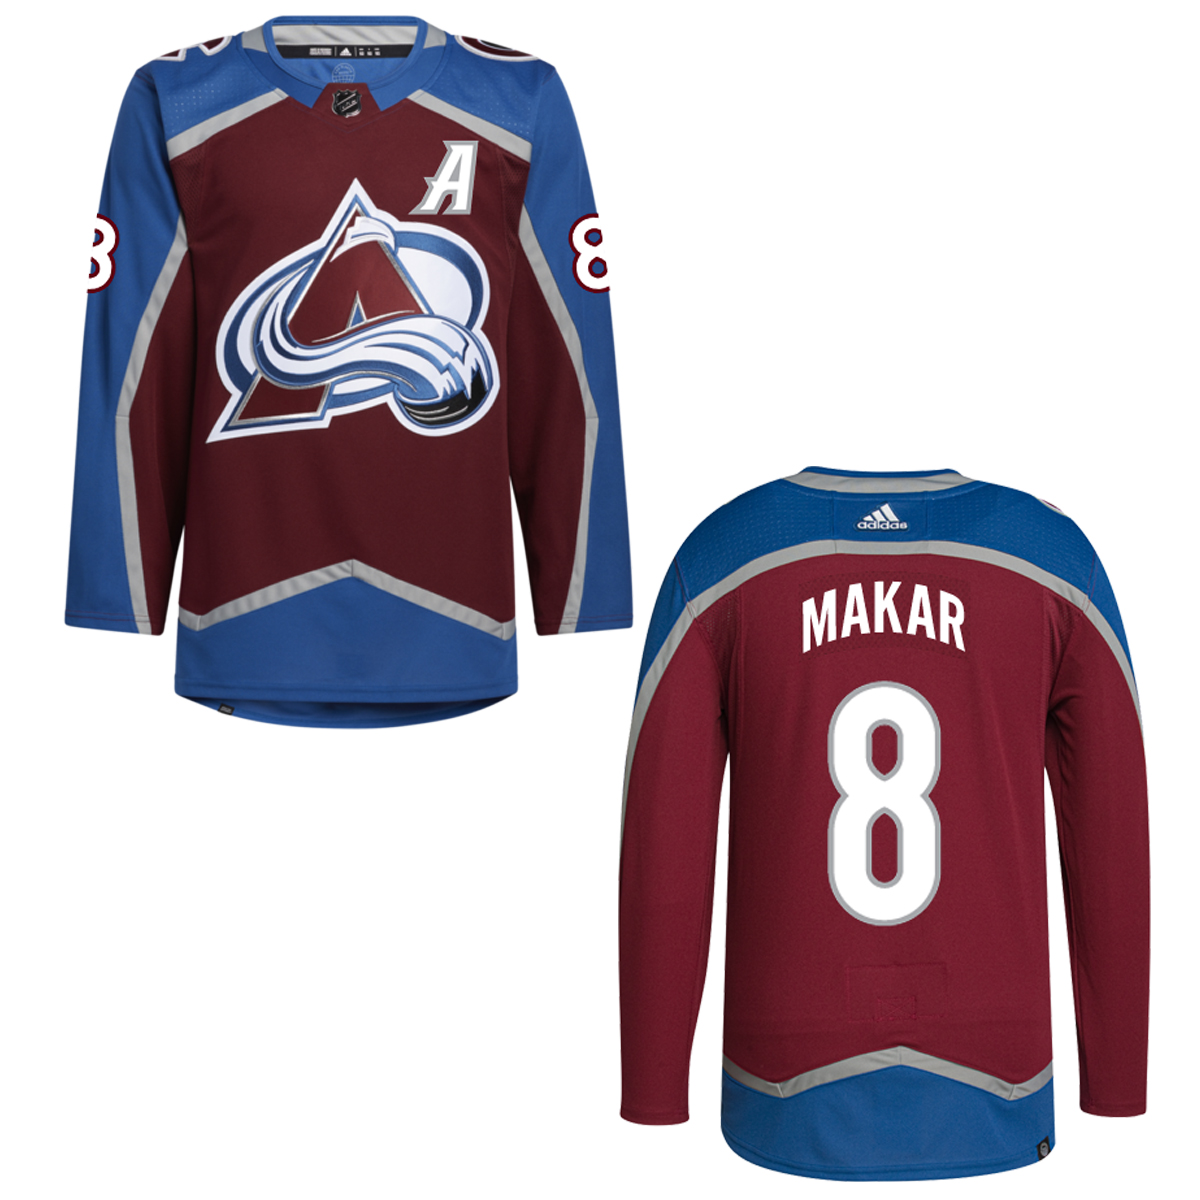 Avalanche away jersey